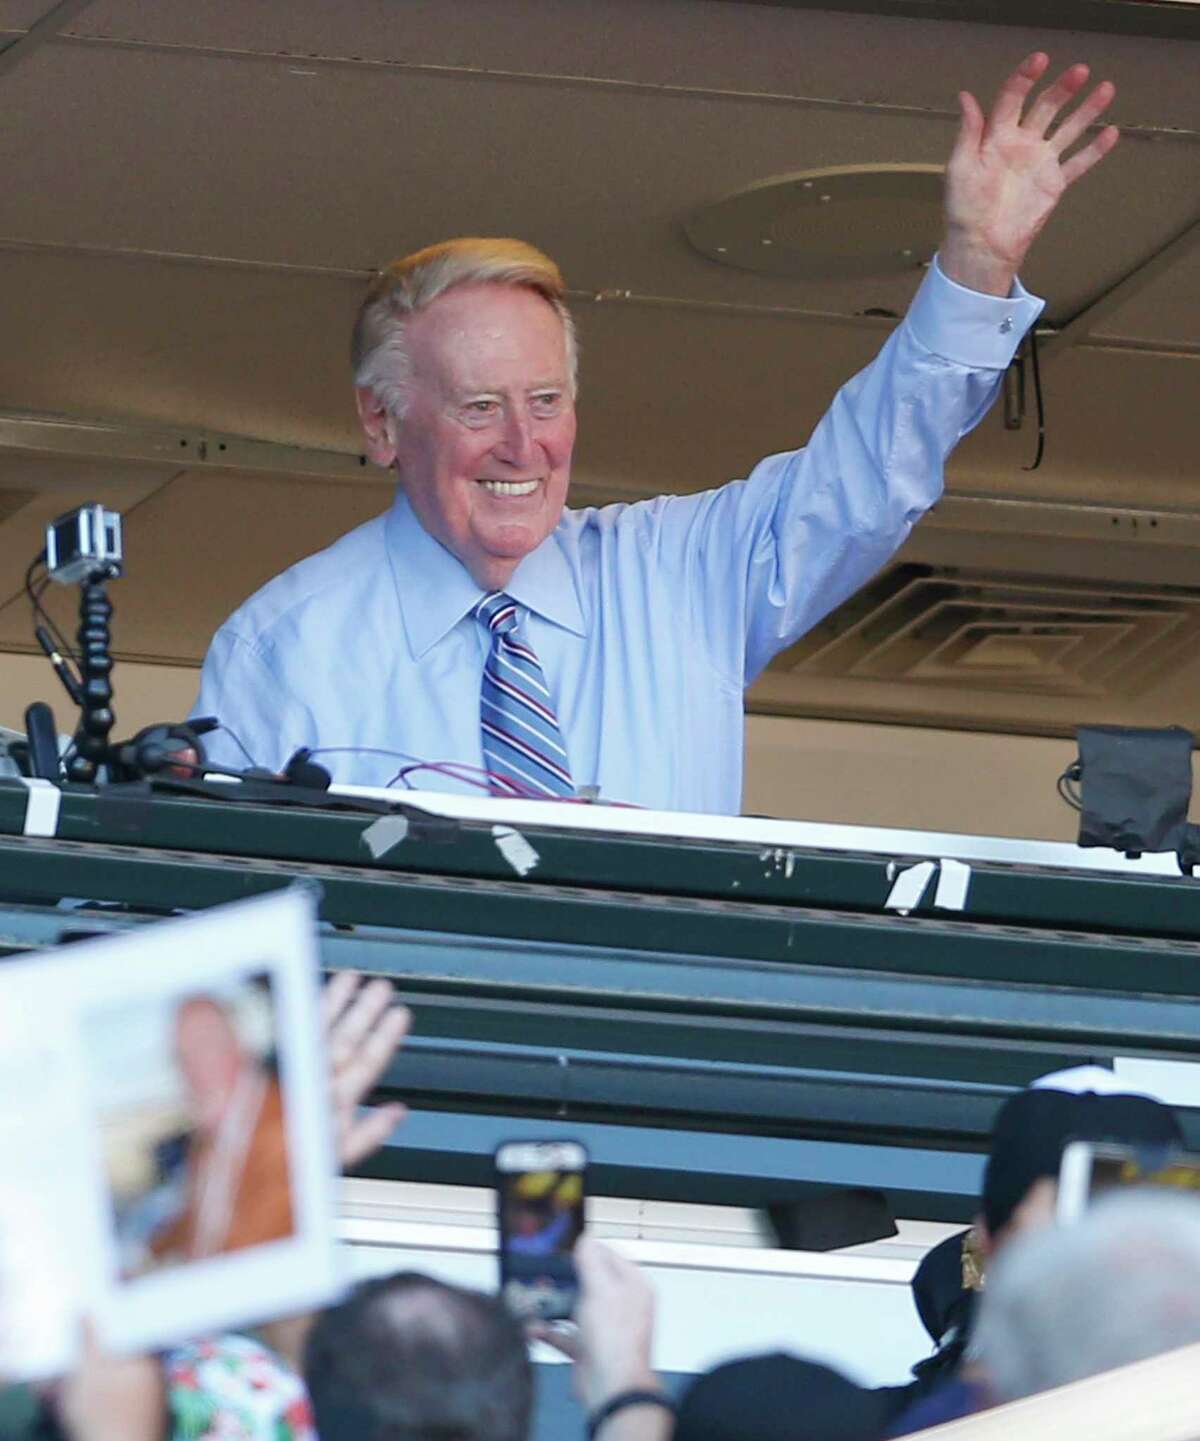 Los Angeles Dodgers' legendary announcer Vin Scully acknowledges the crowd during 7th inning stretch in Scully's final regular season broadcast during Dodgers' MLB game against San Francisco Giants at AT&T Park in San Francisco, Calif., on Sunday, October 2, 2016.